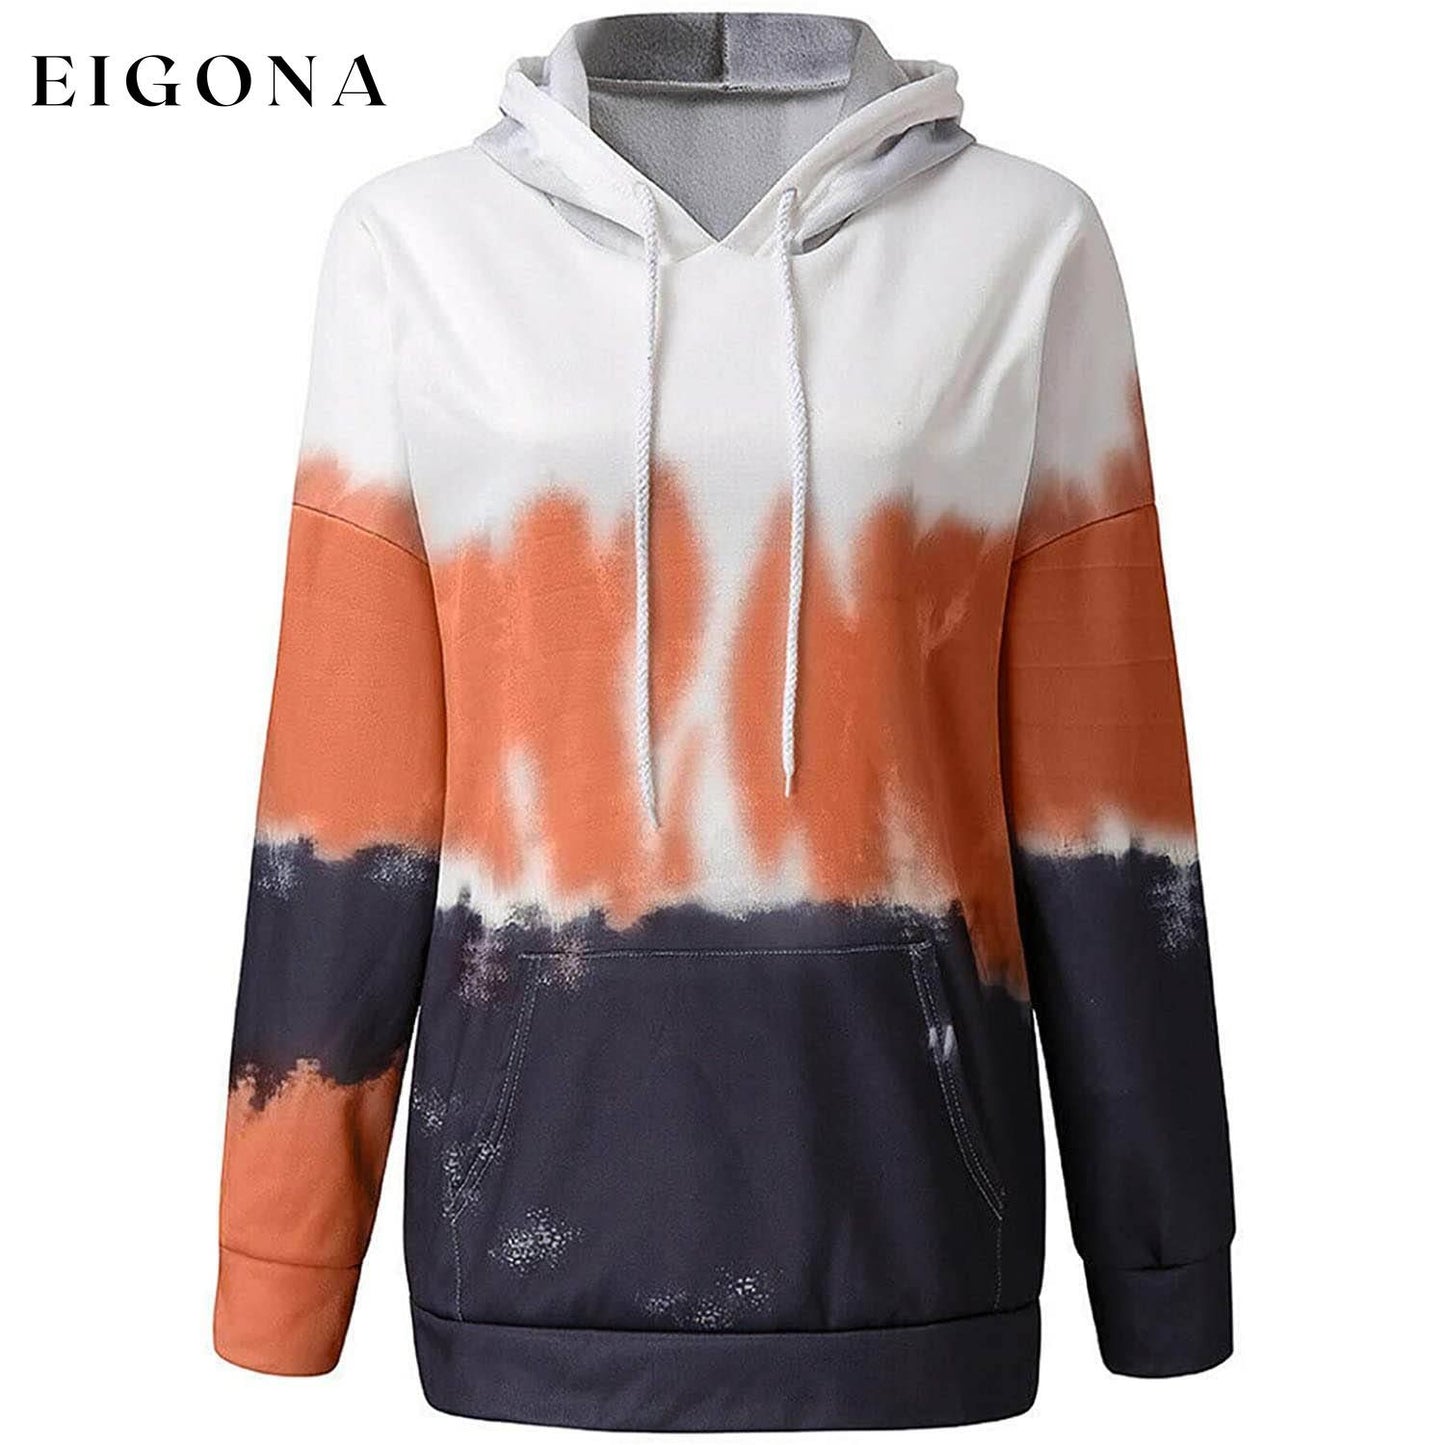 Women Hoodies Tops Tie Dye Printed Long Sleeve Drawstring Pullover Sweatshirts with Pocket __stock:100 clothes refund_fee:1200 tops